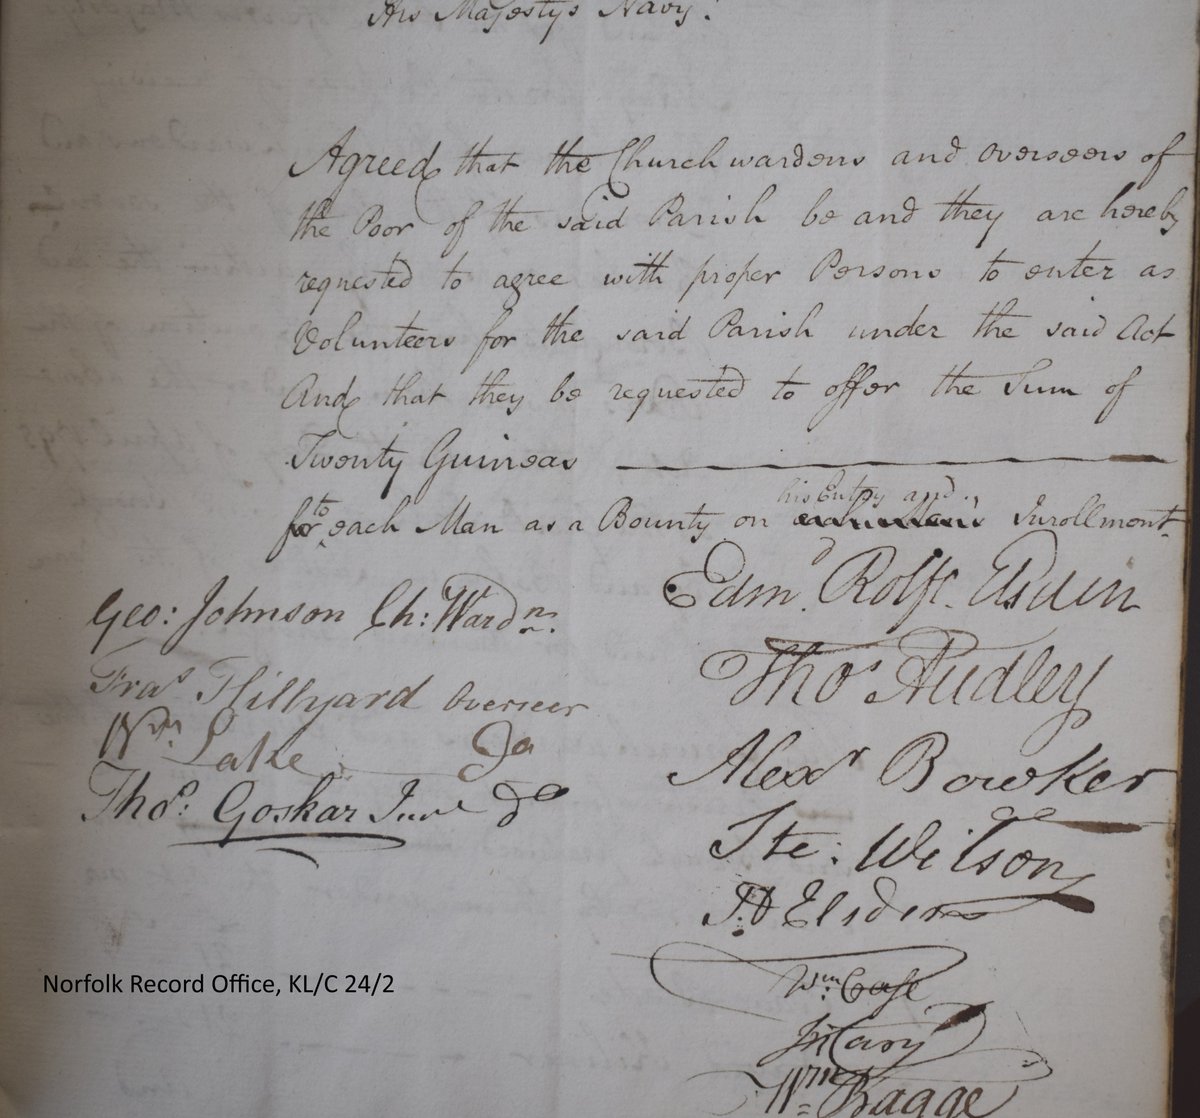 #onthisday 1795 the Lynn Petty Session agreed to raise nine men to serve in his Majesty’s navy. Each man was to be offered a bounty of Twenty Guineas on entry and enrolment @NorfolkRO